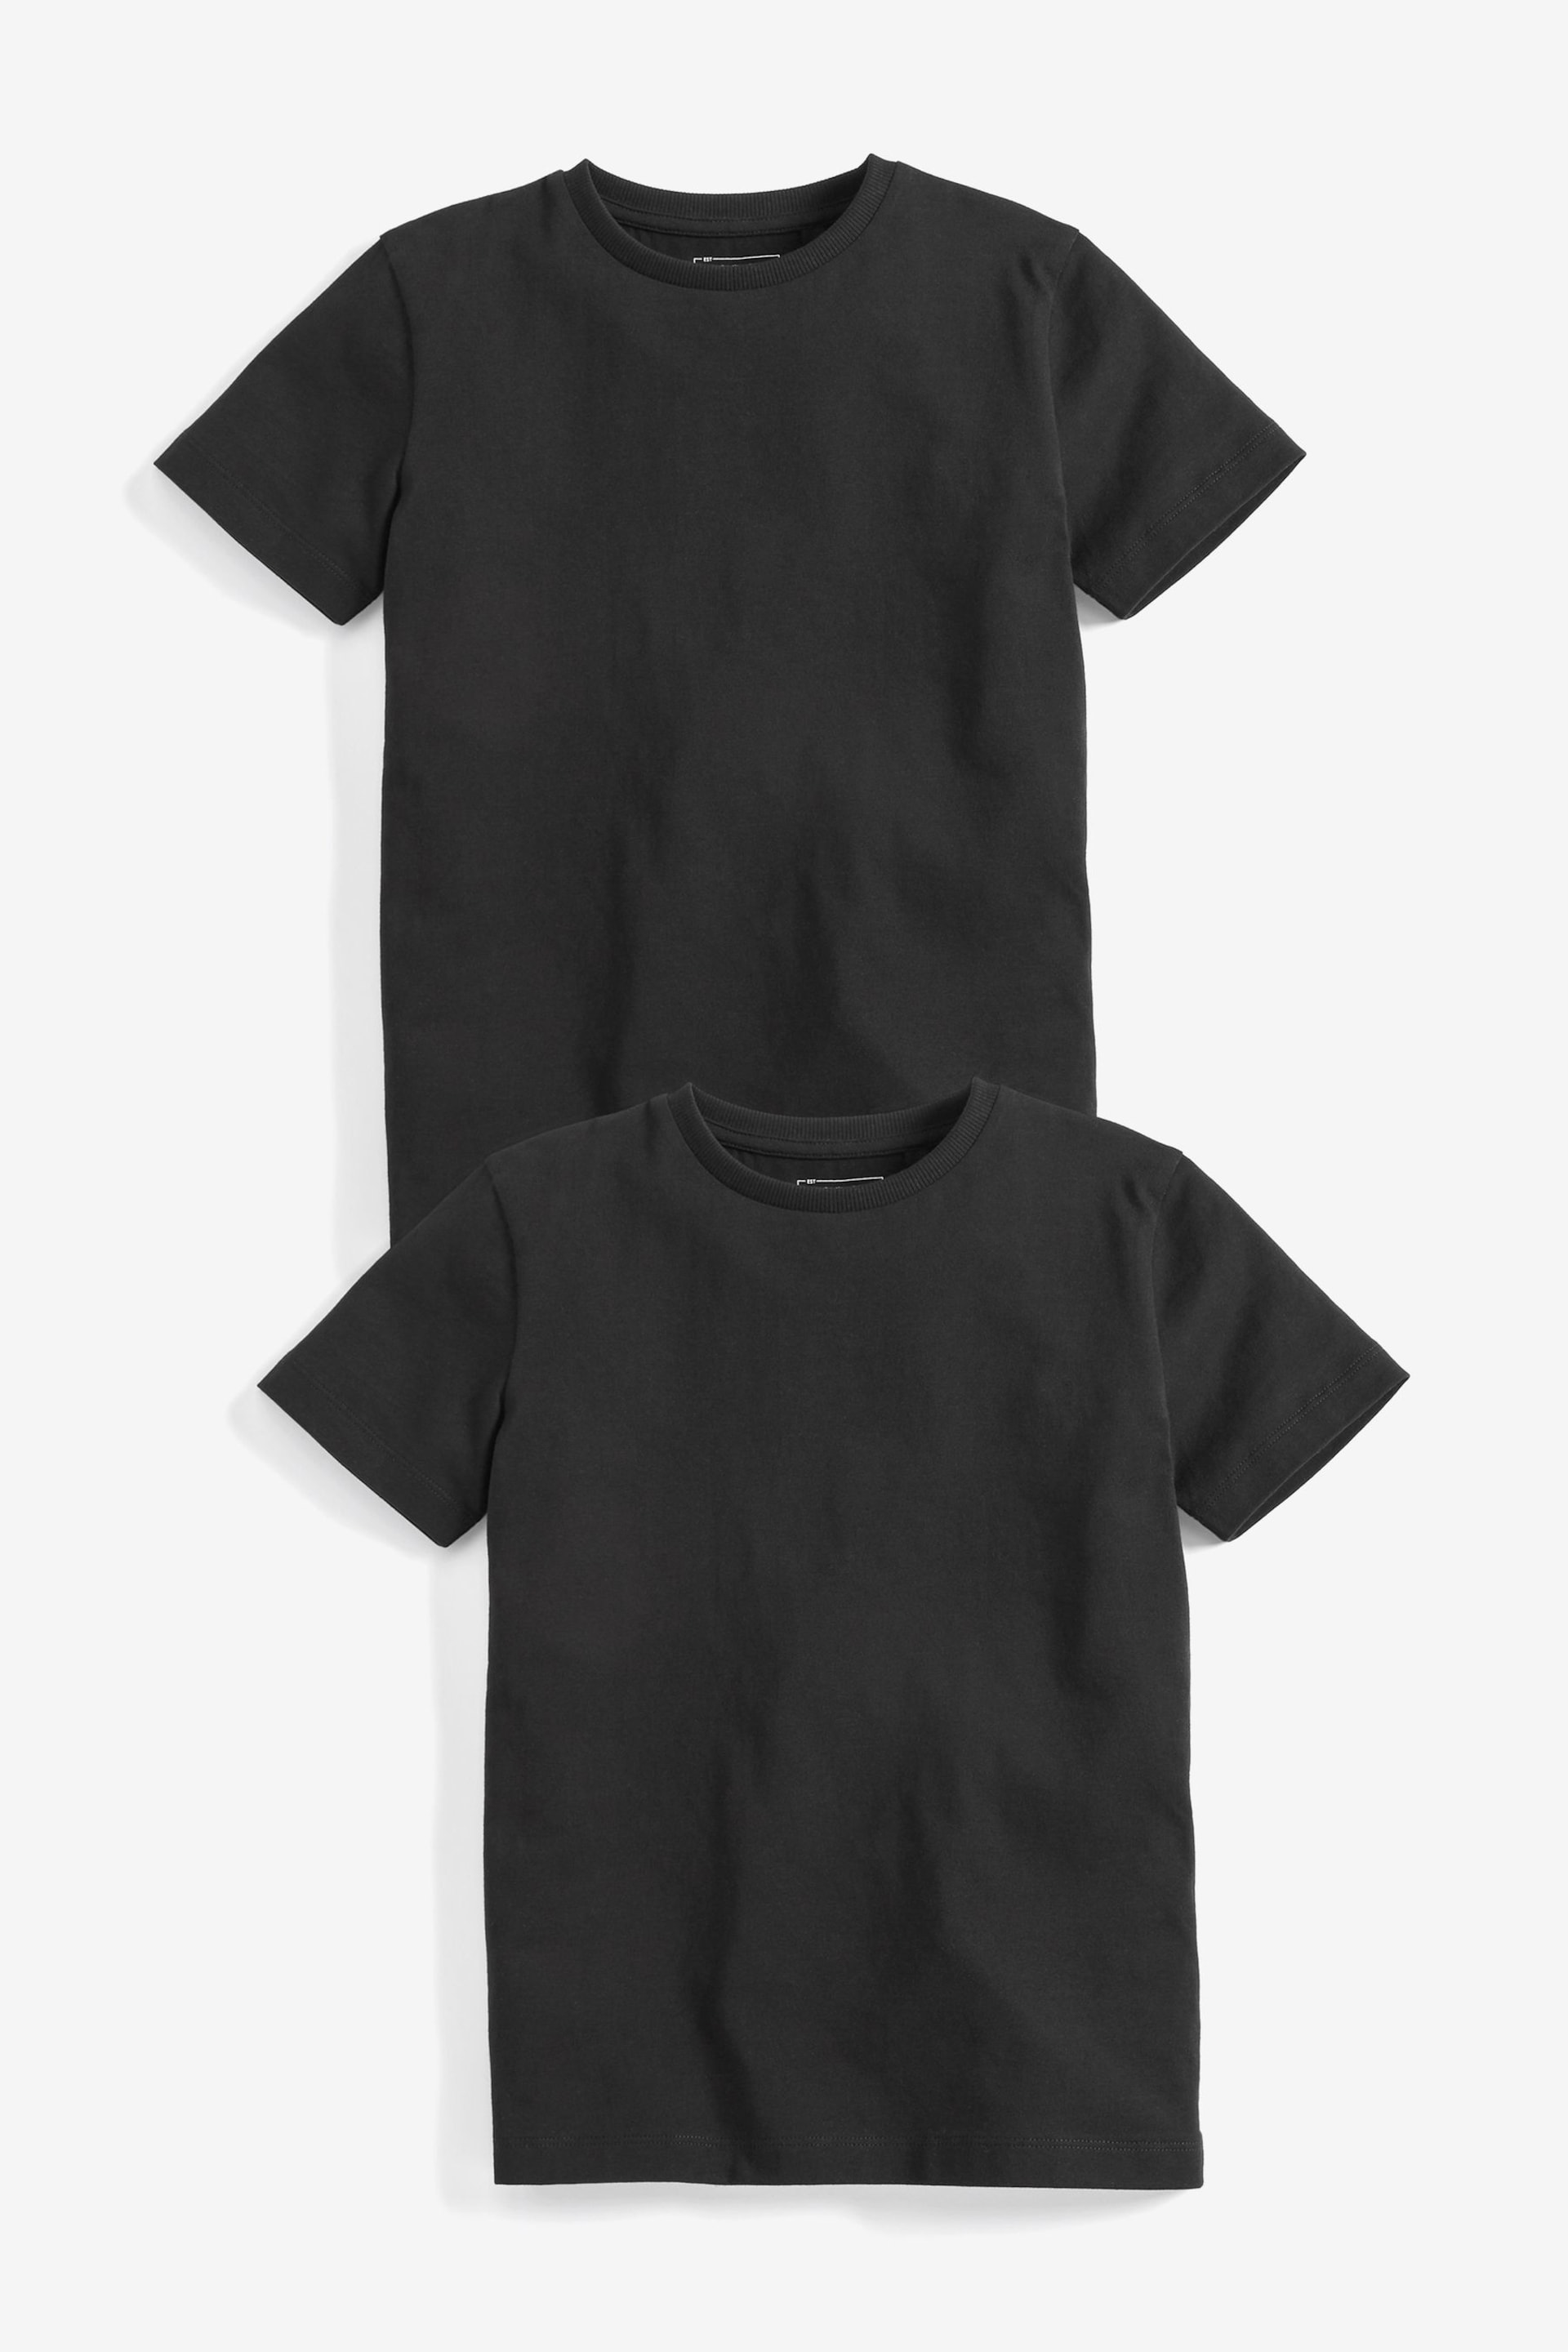 Black Short Sleeve Cotton T-Shirts 2 Pack (3-16yrs) - Image 1 of 4